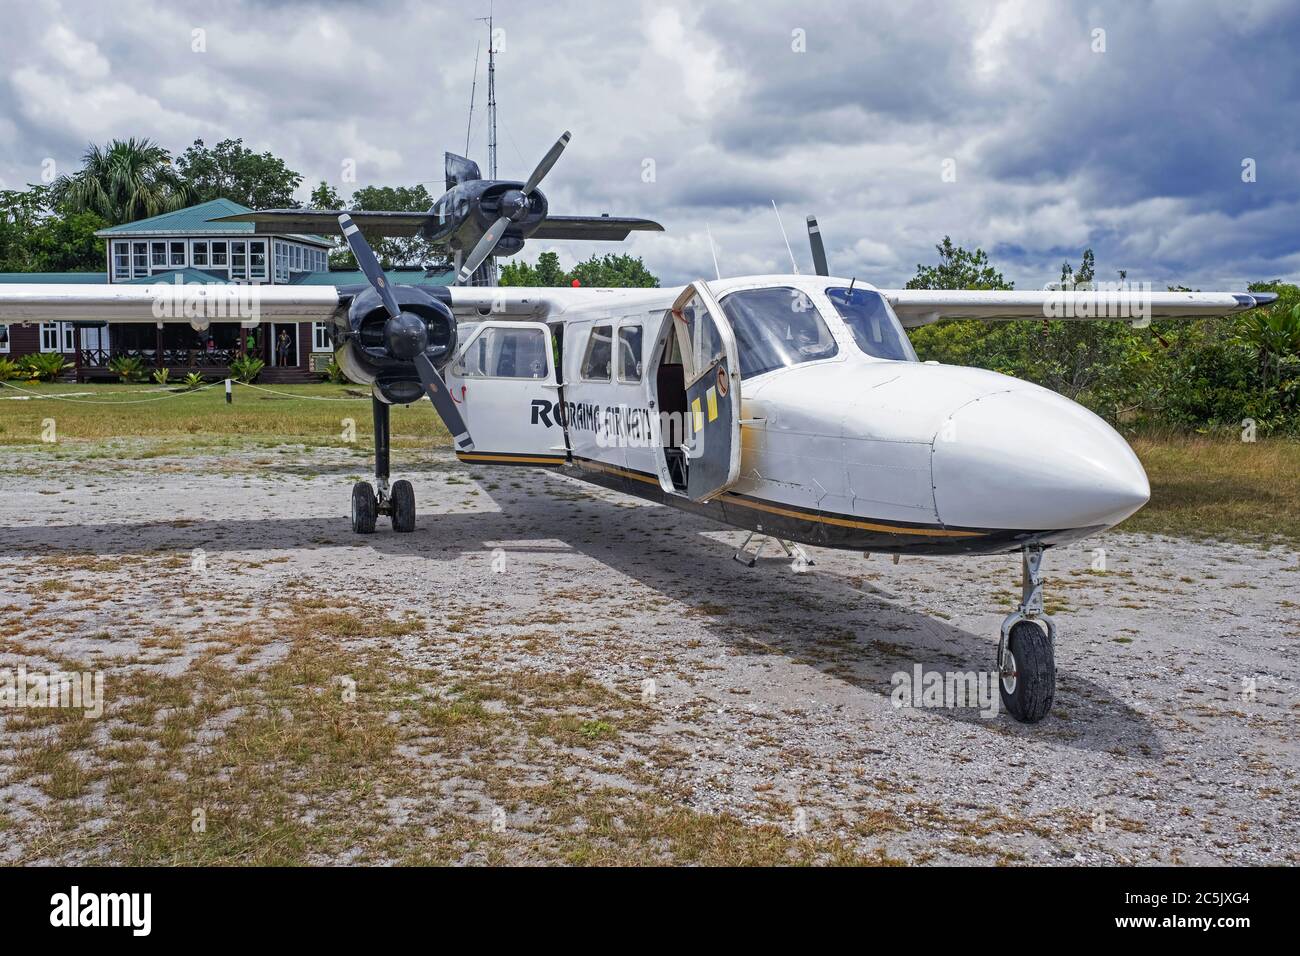 Britten-Norman Trislander aircraft from Roraima Airways at the Kaieteur International Airport in the Kaieteur National Park, Guyana, South-America Stock Photo